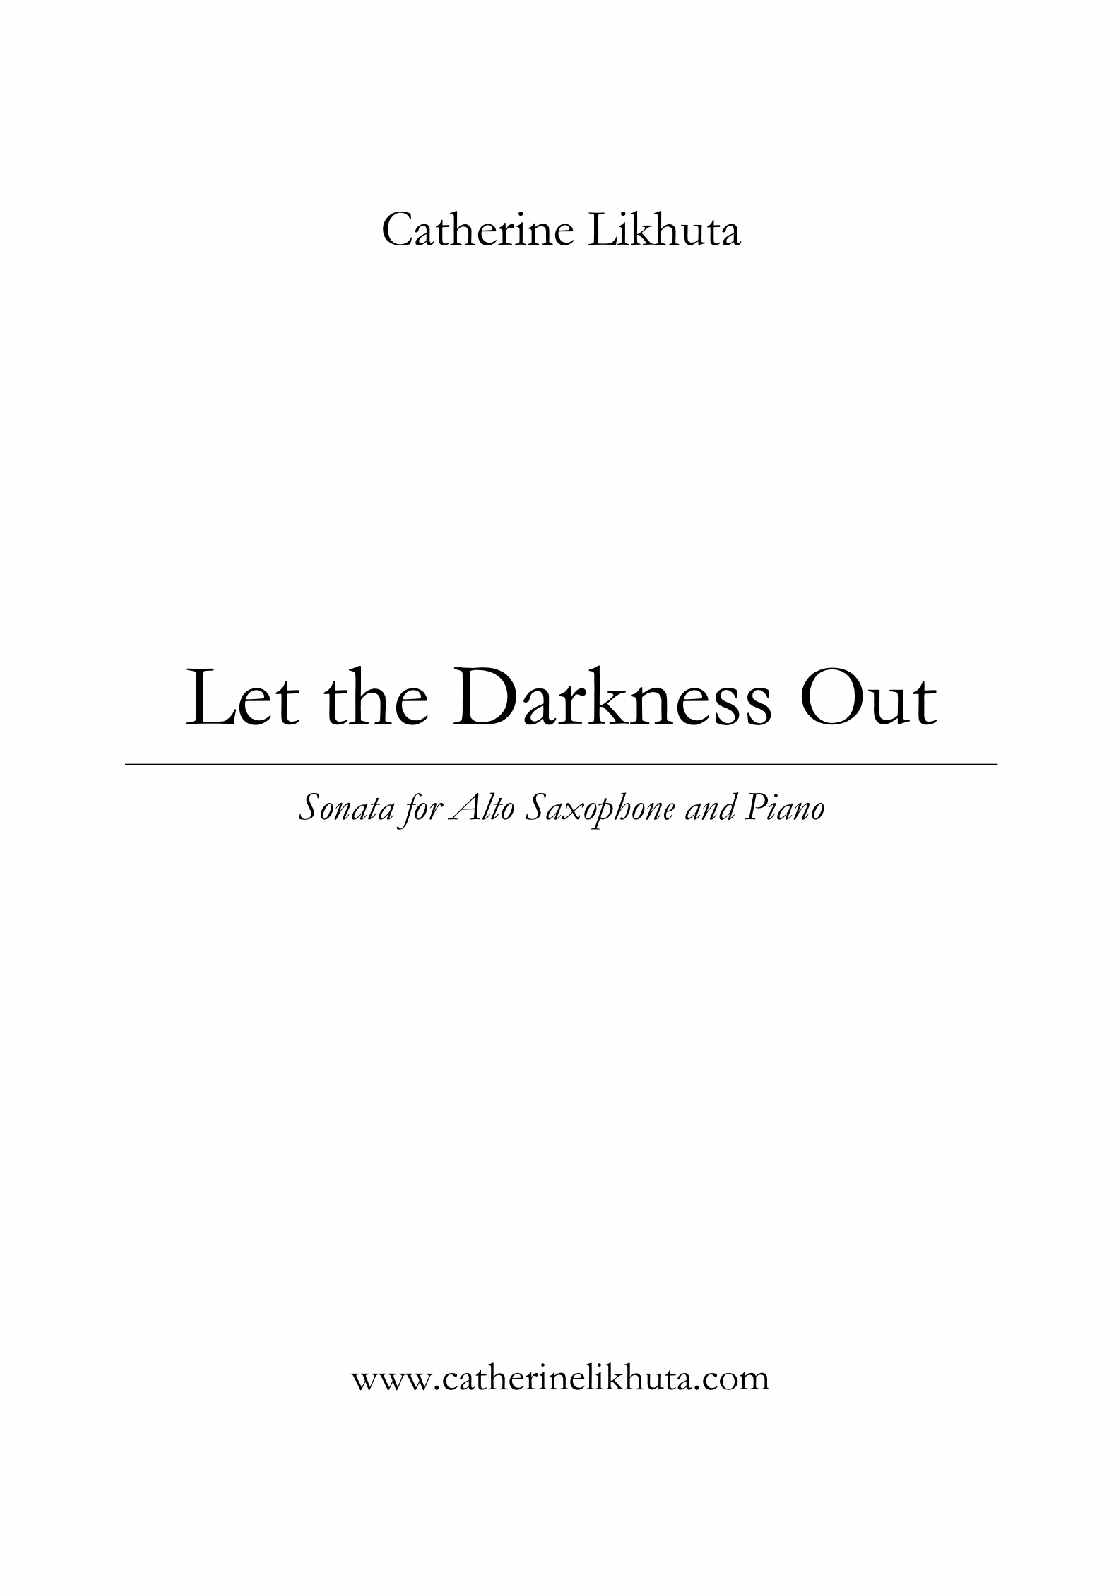 Let The Darkness Out by Catherine Likhuta